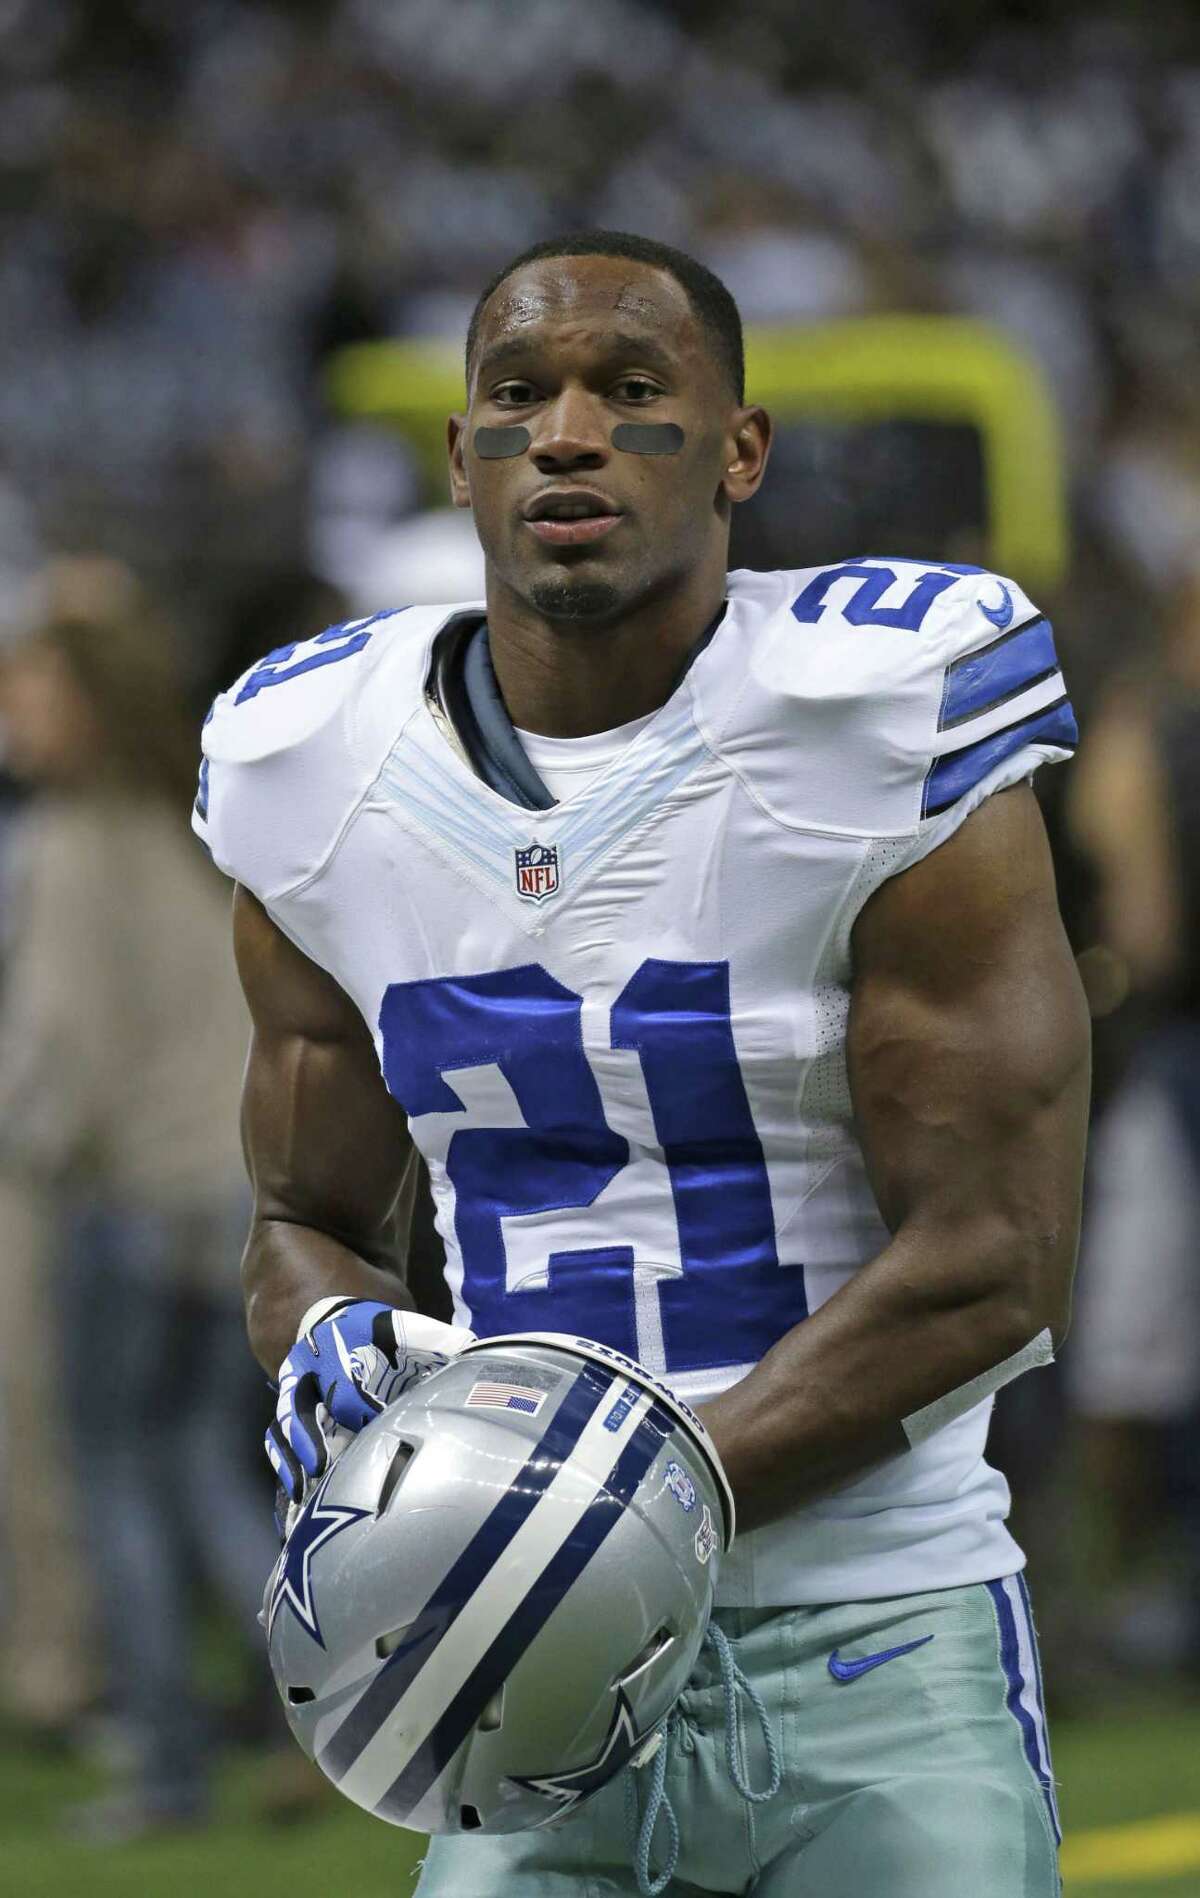 Dallas Cowboys running back Joseph Randle has been arrested for the second time in less than four months, this time on suspicion of marijuana possession after a domestic violence call to police in his hometown, Wichita, Kan.